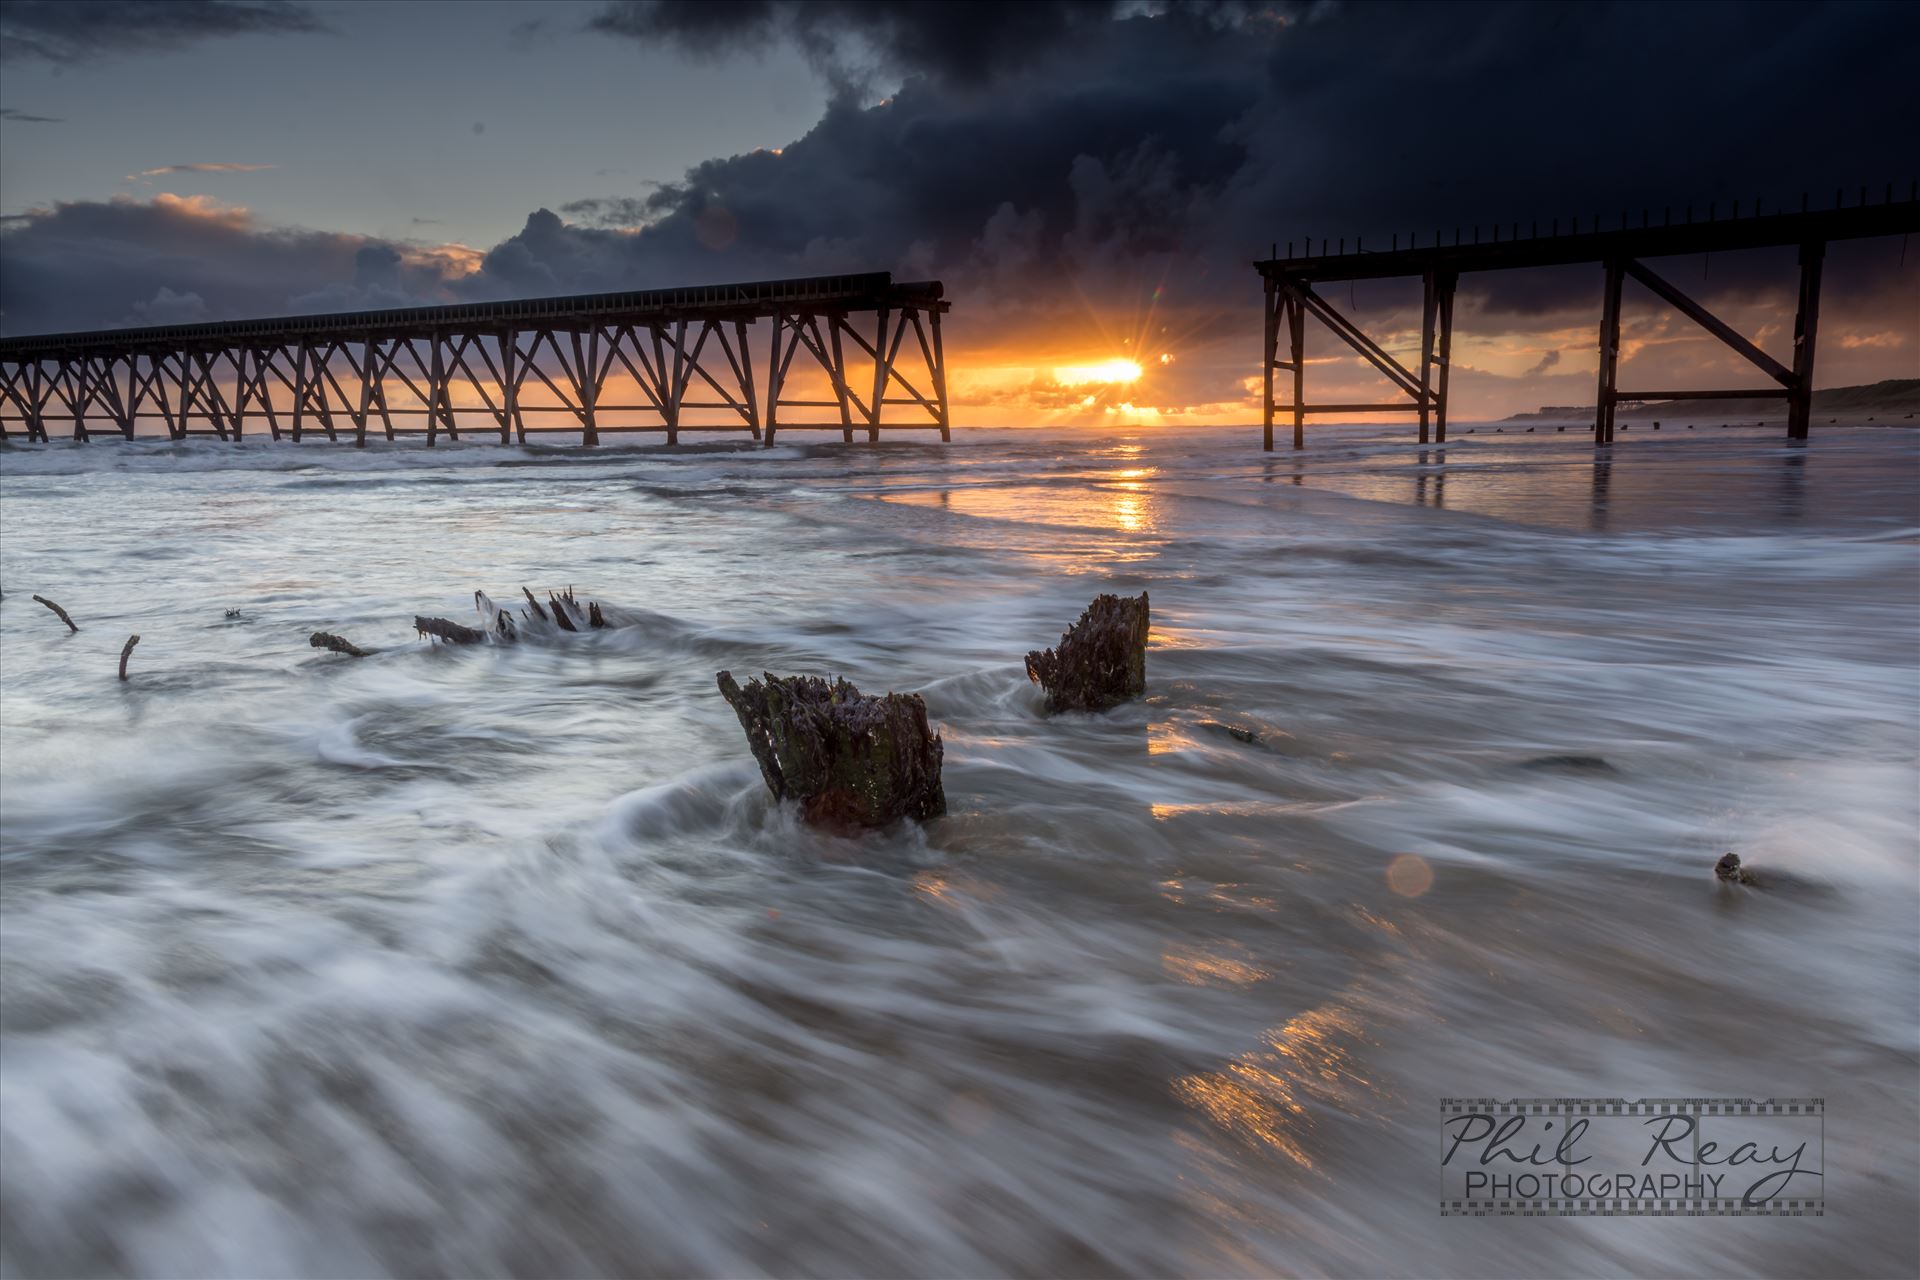 Sunrise at Steetley Pier - Taken at Steetley Pier, Hartlepool. The pier is all that remains of the former Steetley Magnesite works. by philreay